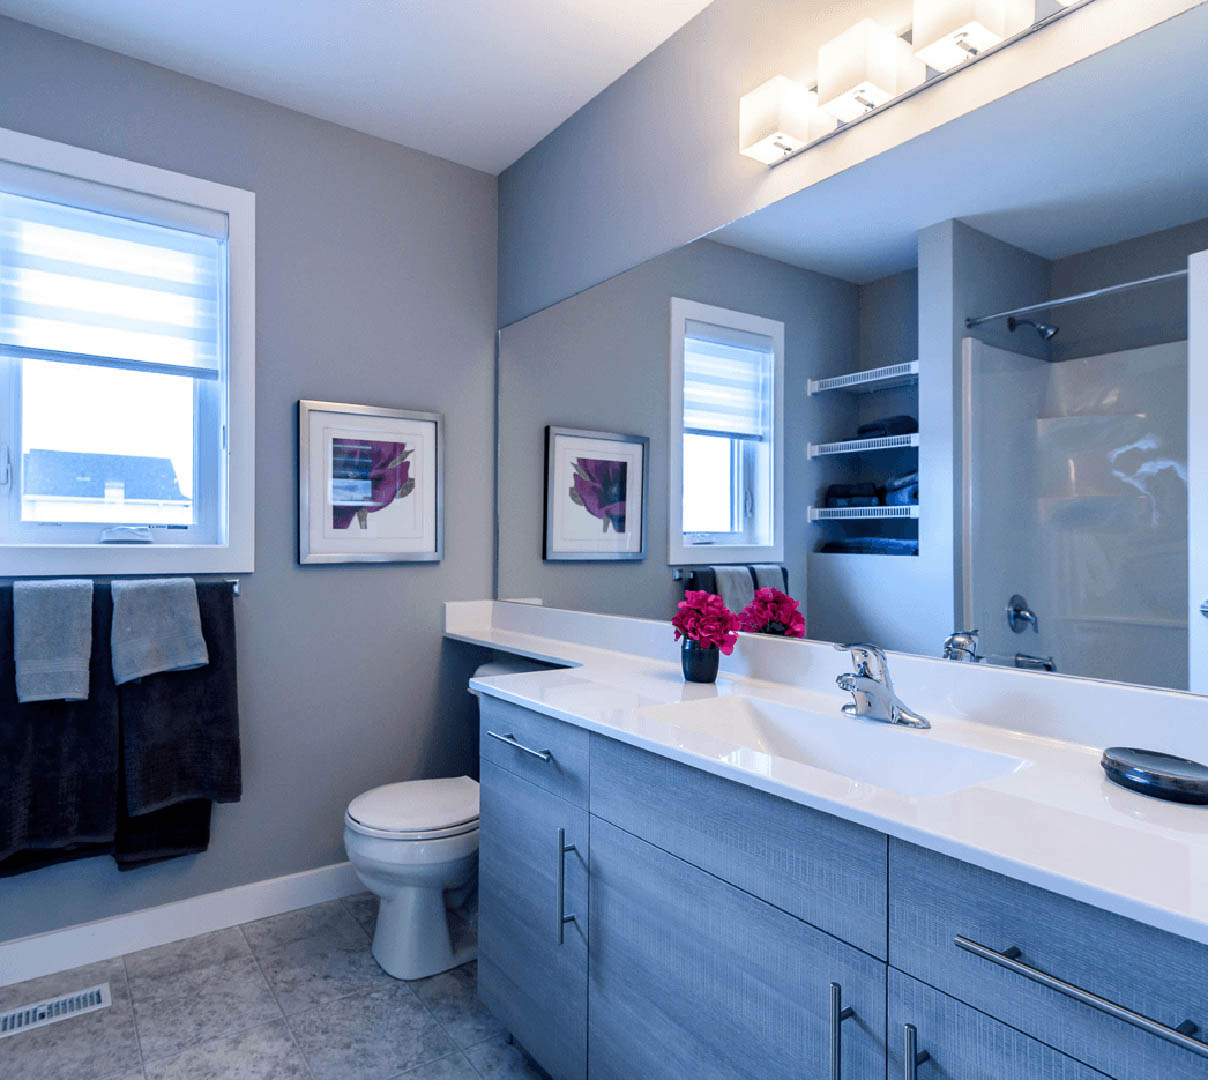 Storage Suggestions that Expand Your Space Bathroom Image